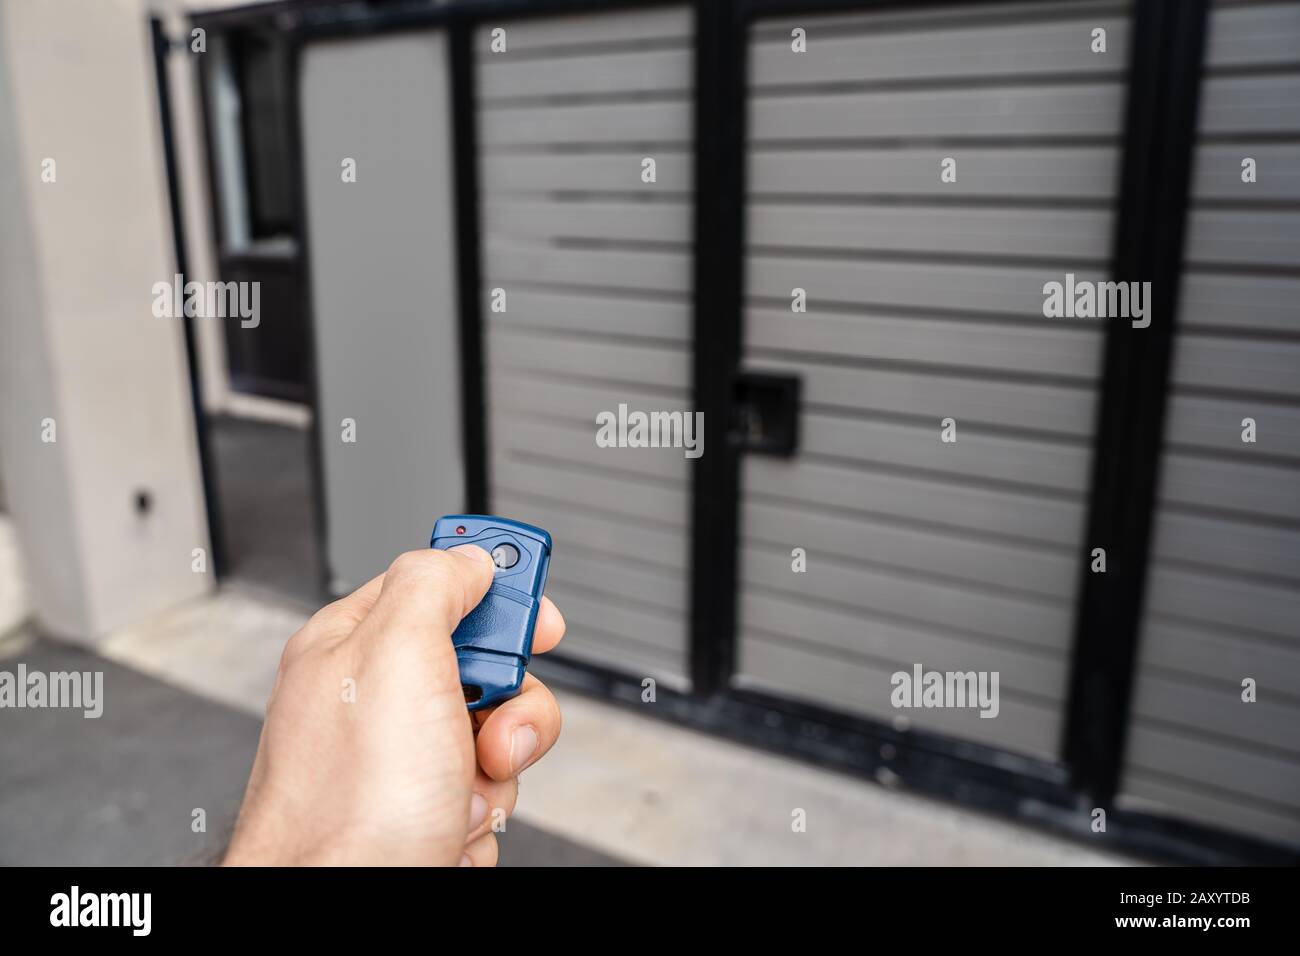 Using Remote Control To Open Electric Gate Stock Photo